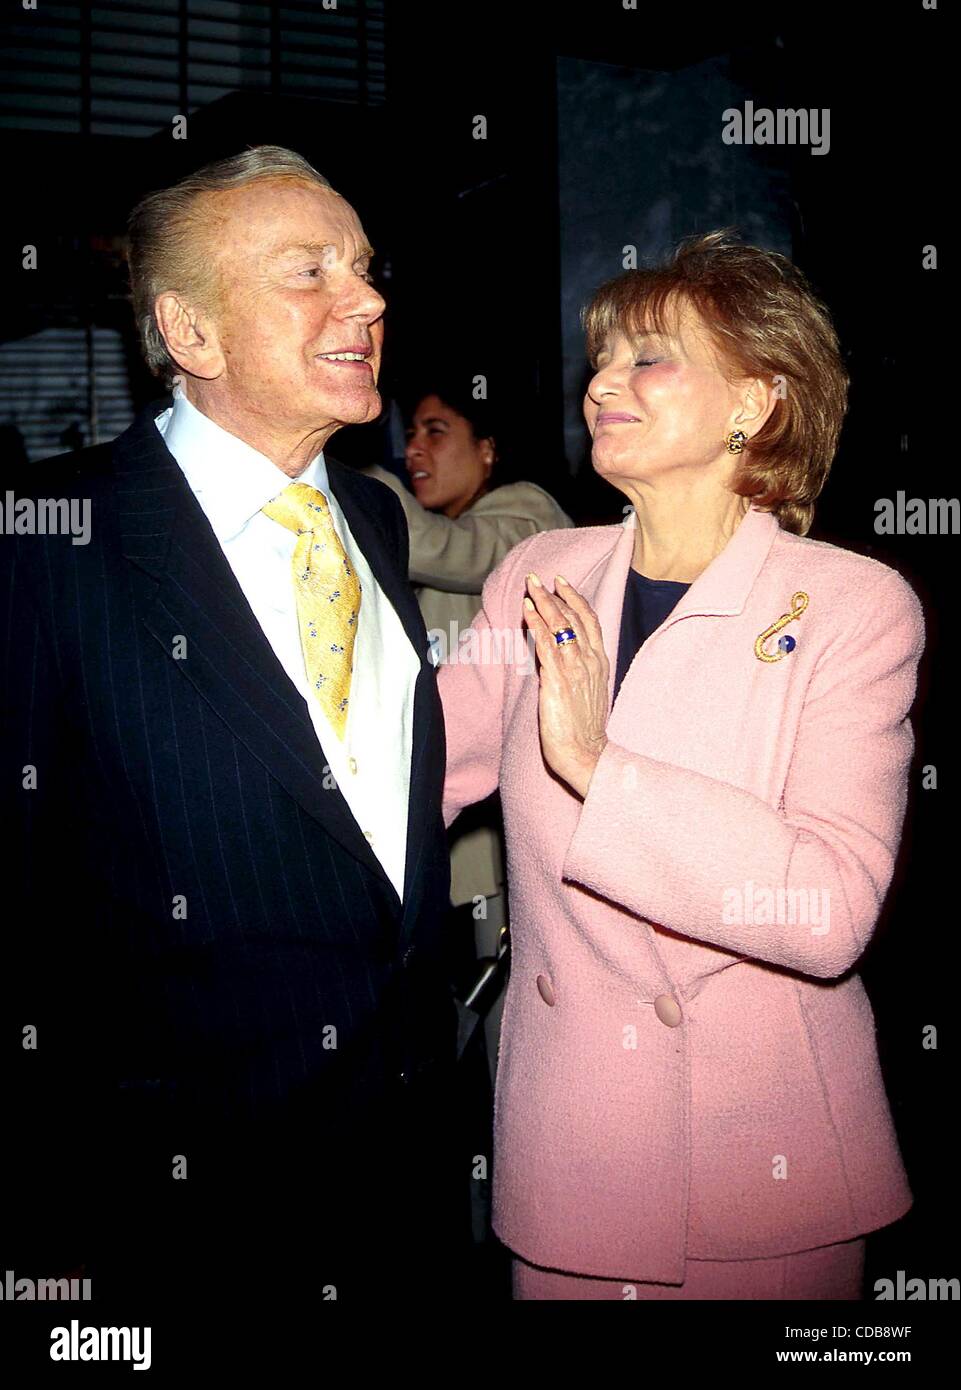 SD0609.A TEVELVISON DIARY:.45 YEARS OF TV GUIDE COVERS OPENING AT THE  MUSEUM OF TV AND RADIO IN NEW YORK New York.JACK PAAR BARBARA WALTERS. /  1998.JACKPAARRETRO(Credit Image: Â© Judie Burstein/Globe  Photos/ZUMAPRESS.com Stock